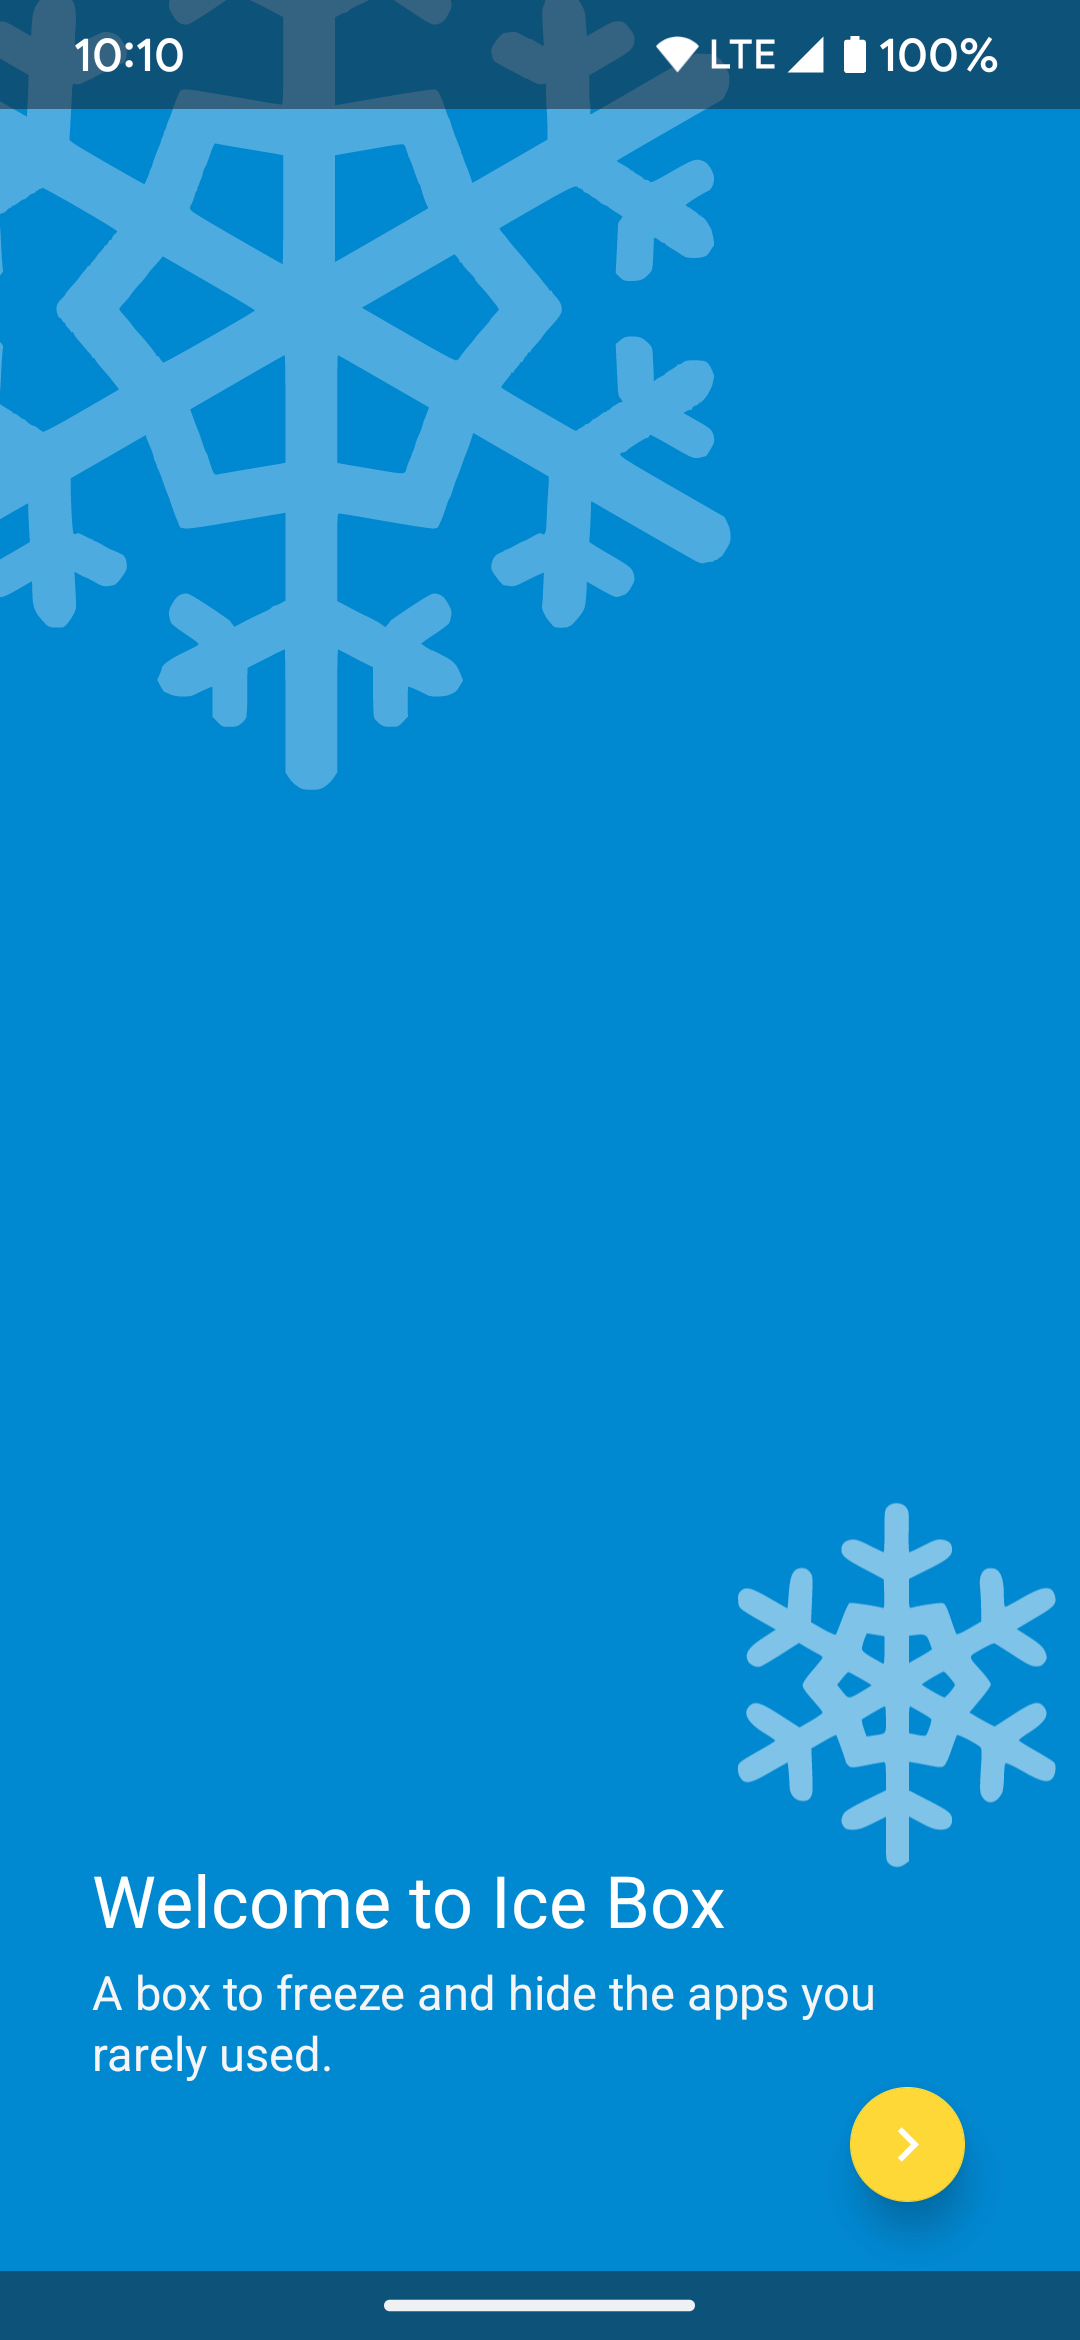 The main intro screen for the Ice Box app